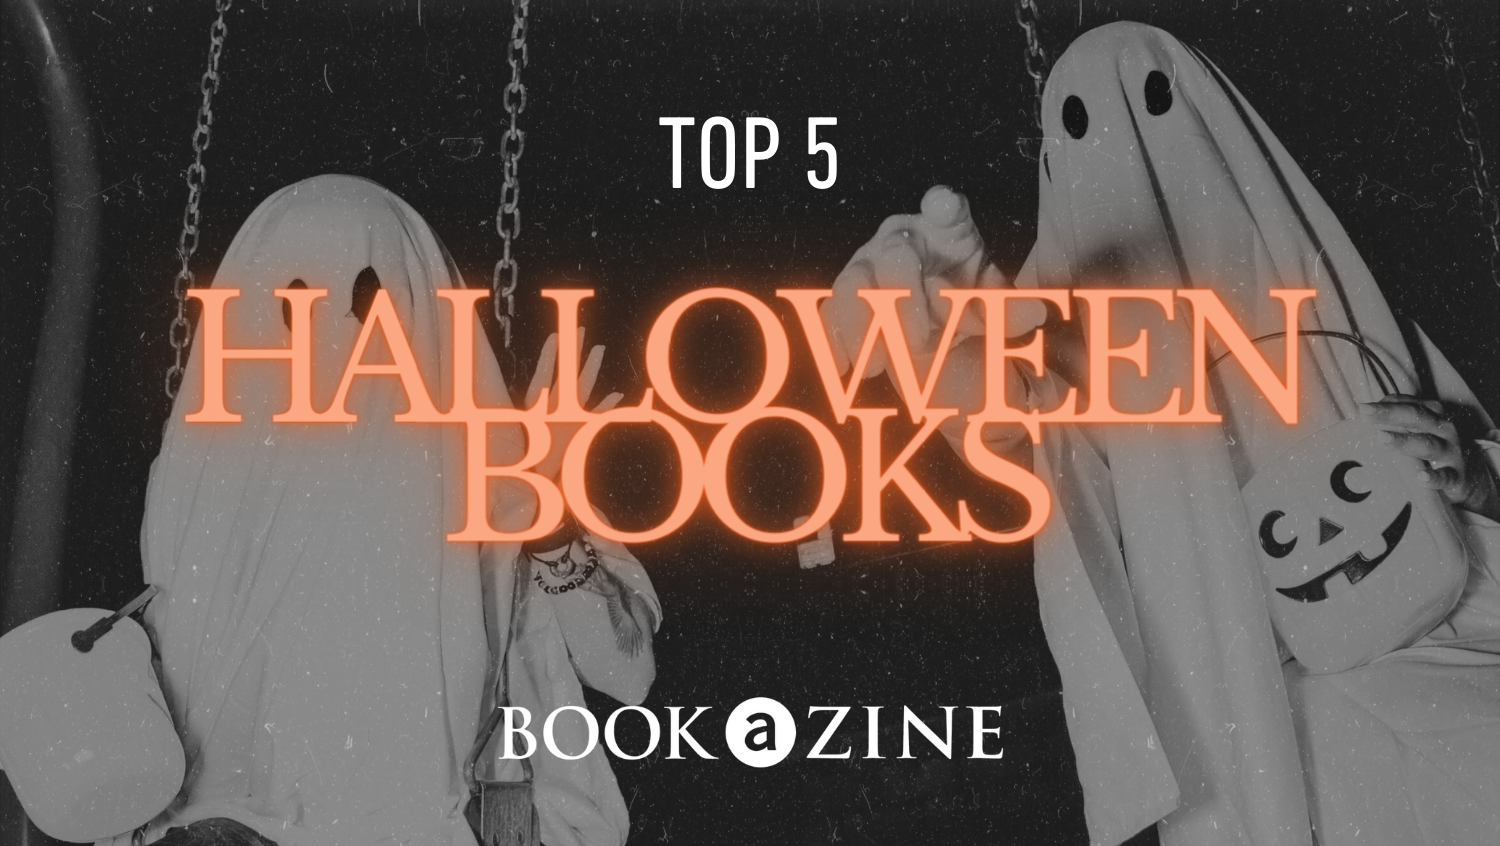 Top 5 Halloween Books To Send Chills Down Your Spine